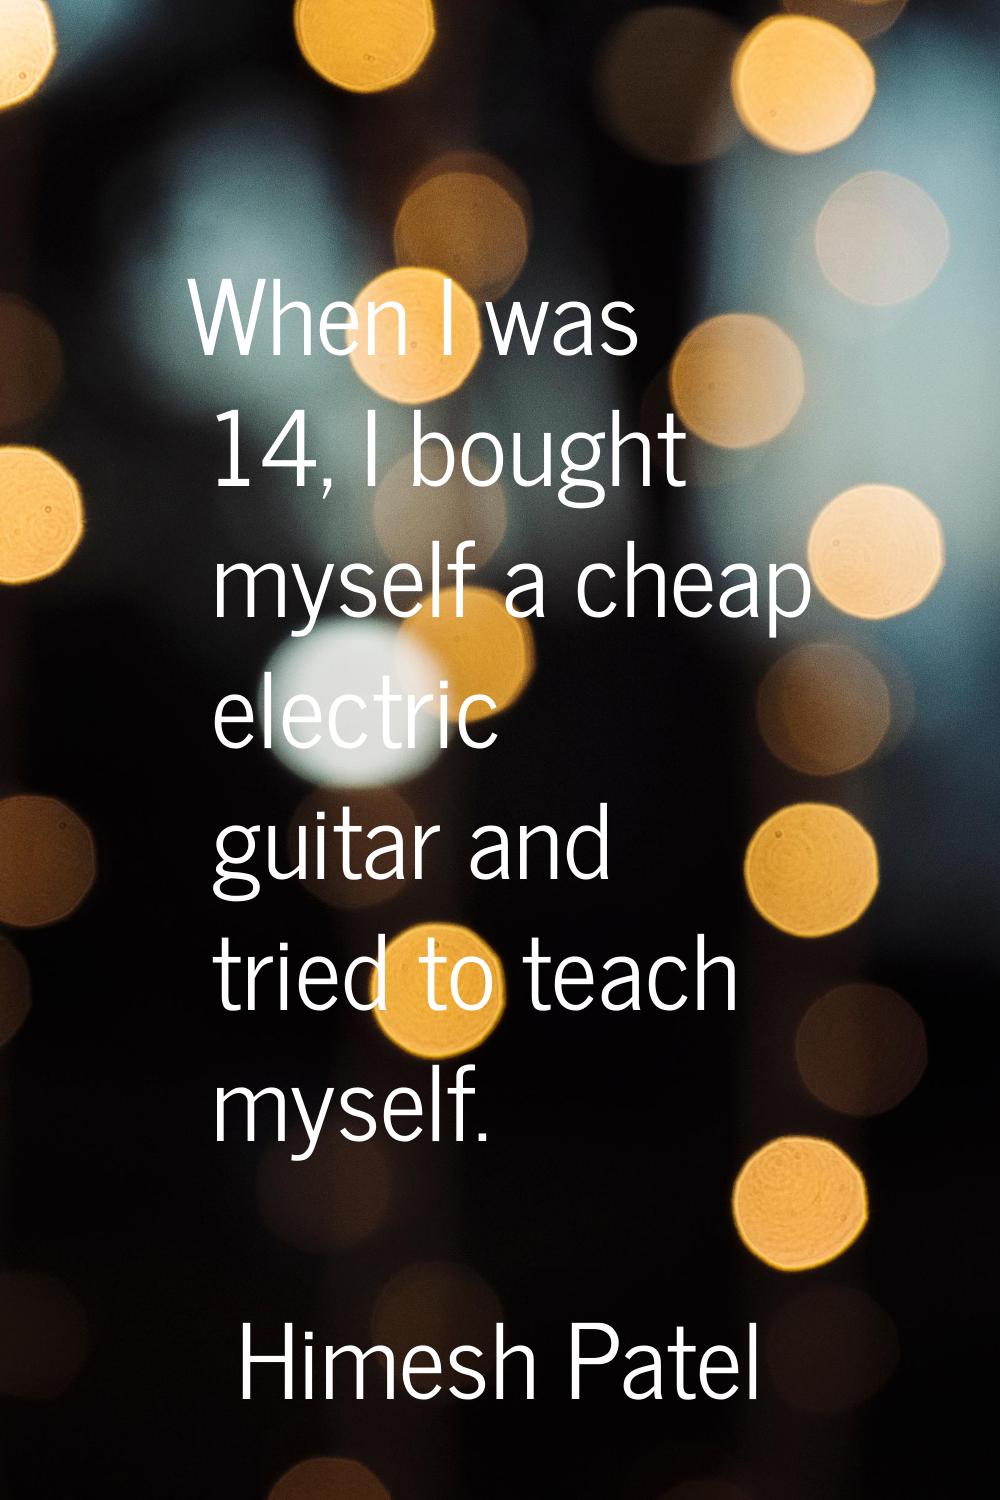 When I was 14, I bought myself a cheap electric guitar and tried to teach myself.